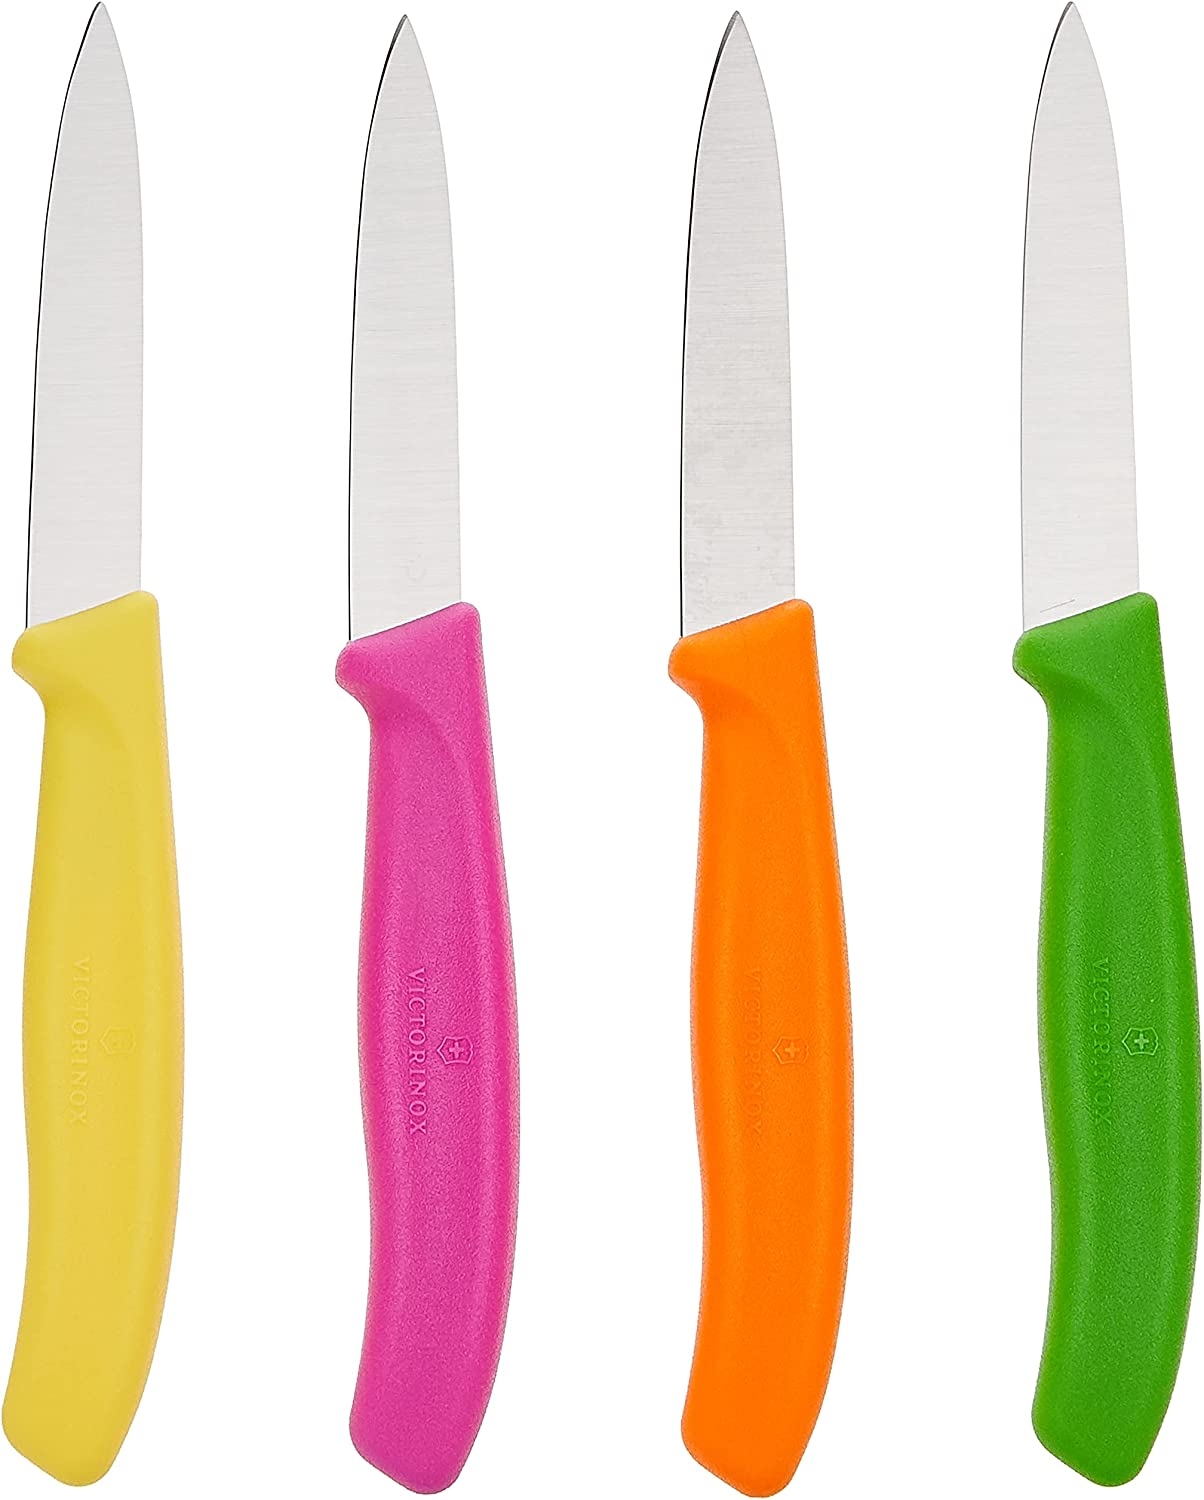 Victorinox 4-Piece Set of 3.25 Inch Swiss Classic Paring Knives with Straight Edge, Spear Point, 3.25″, Pink/Green/Yellow/Orange